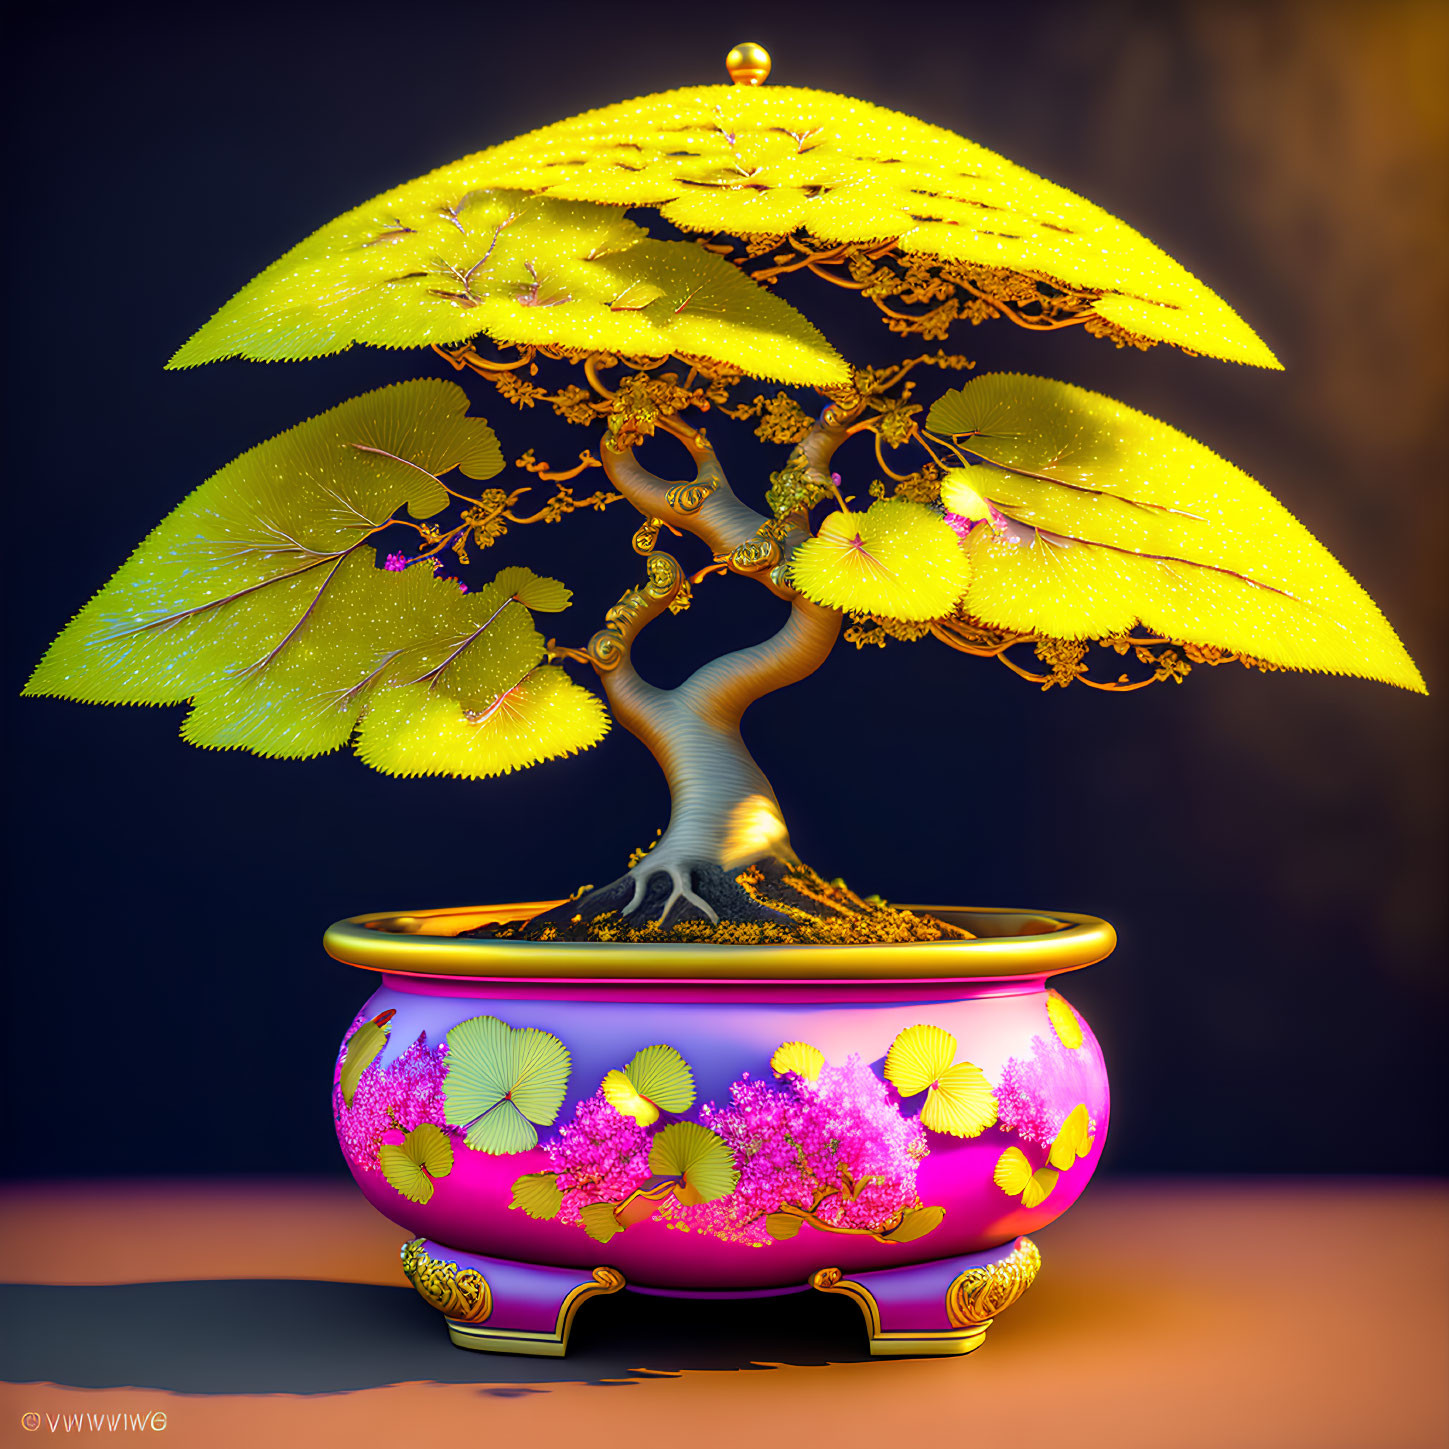 Stylized bonsai tree with golden accents and luminescent leaves in colorful pot